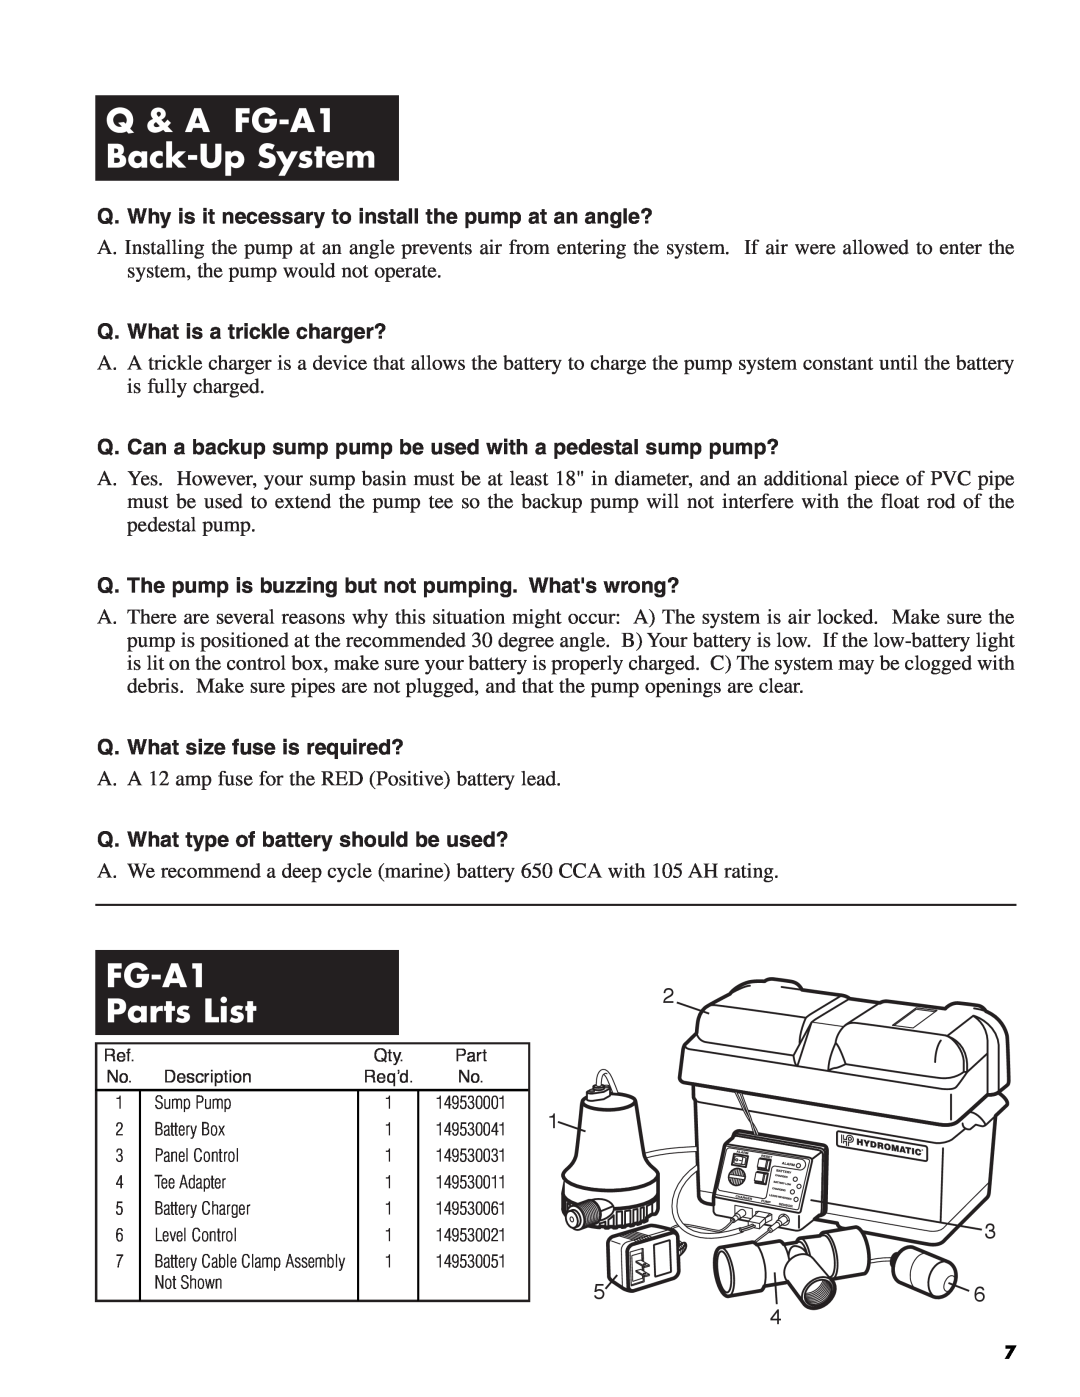 Pentair service manual Q & A FG-A1 Back-Up System, Parts List, Q. Why is it necessary to install the pump at an angle? 